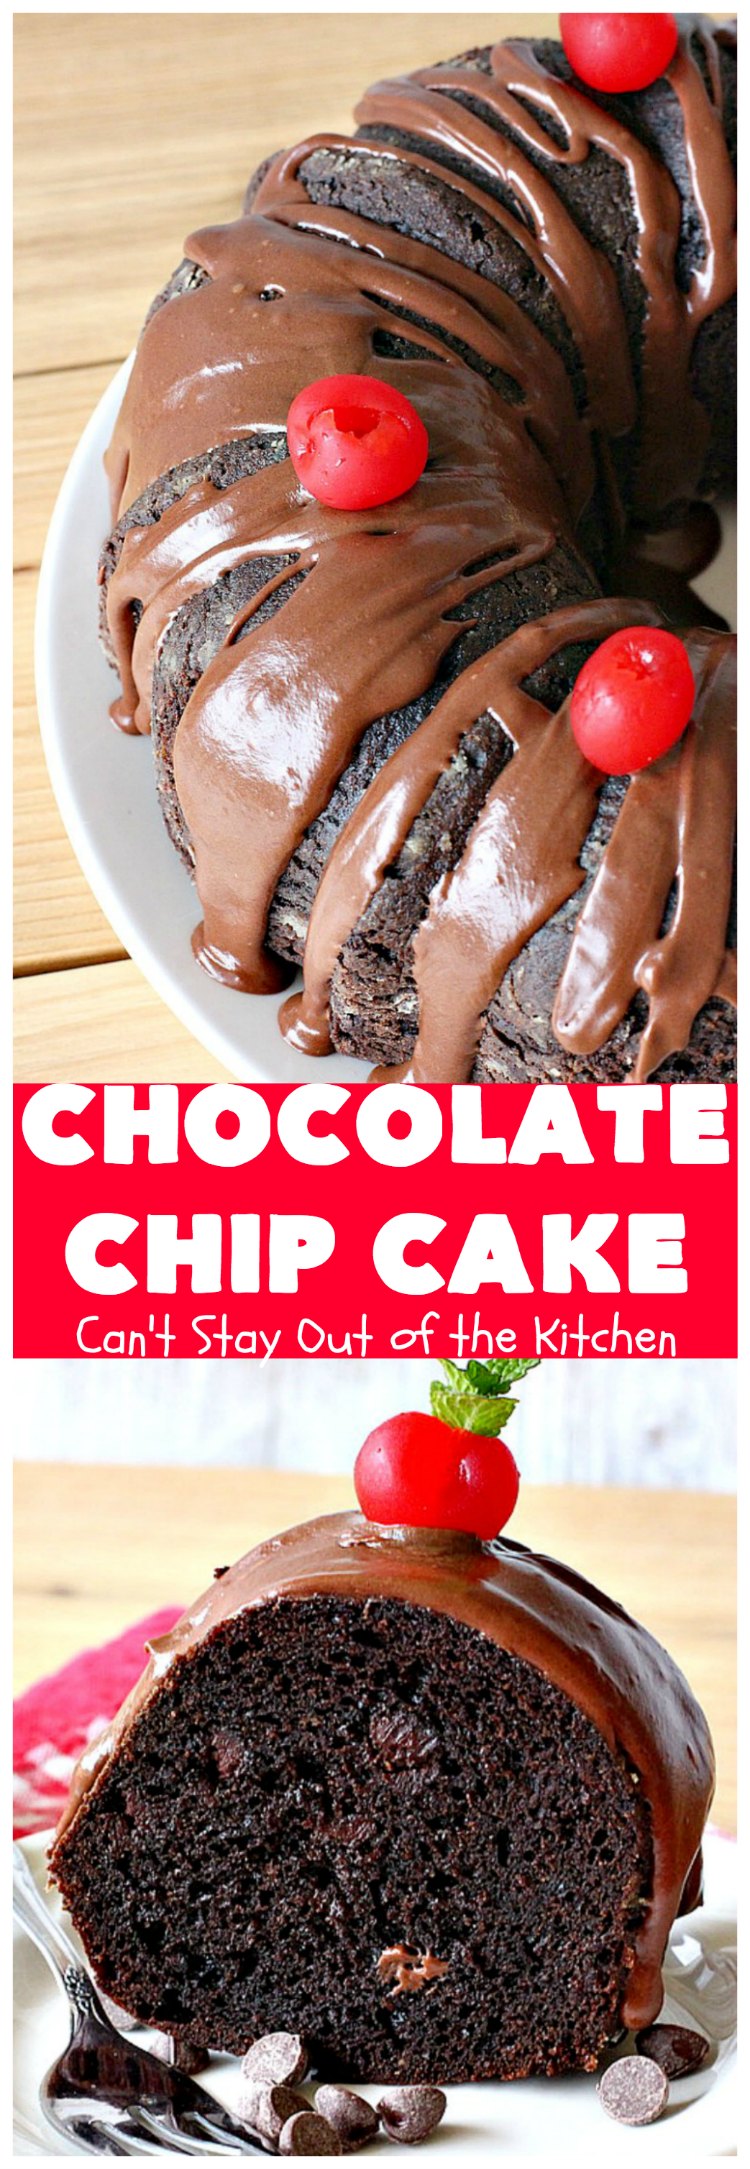 Chocolate Chip Cake | Can't Stay Out of the Kitchen